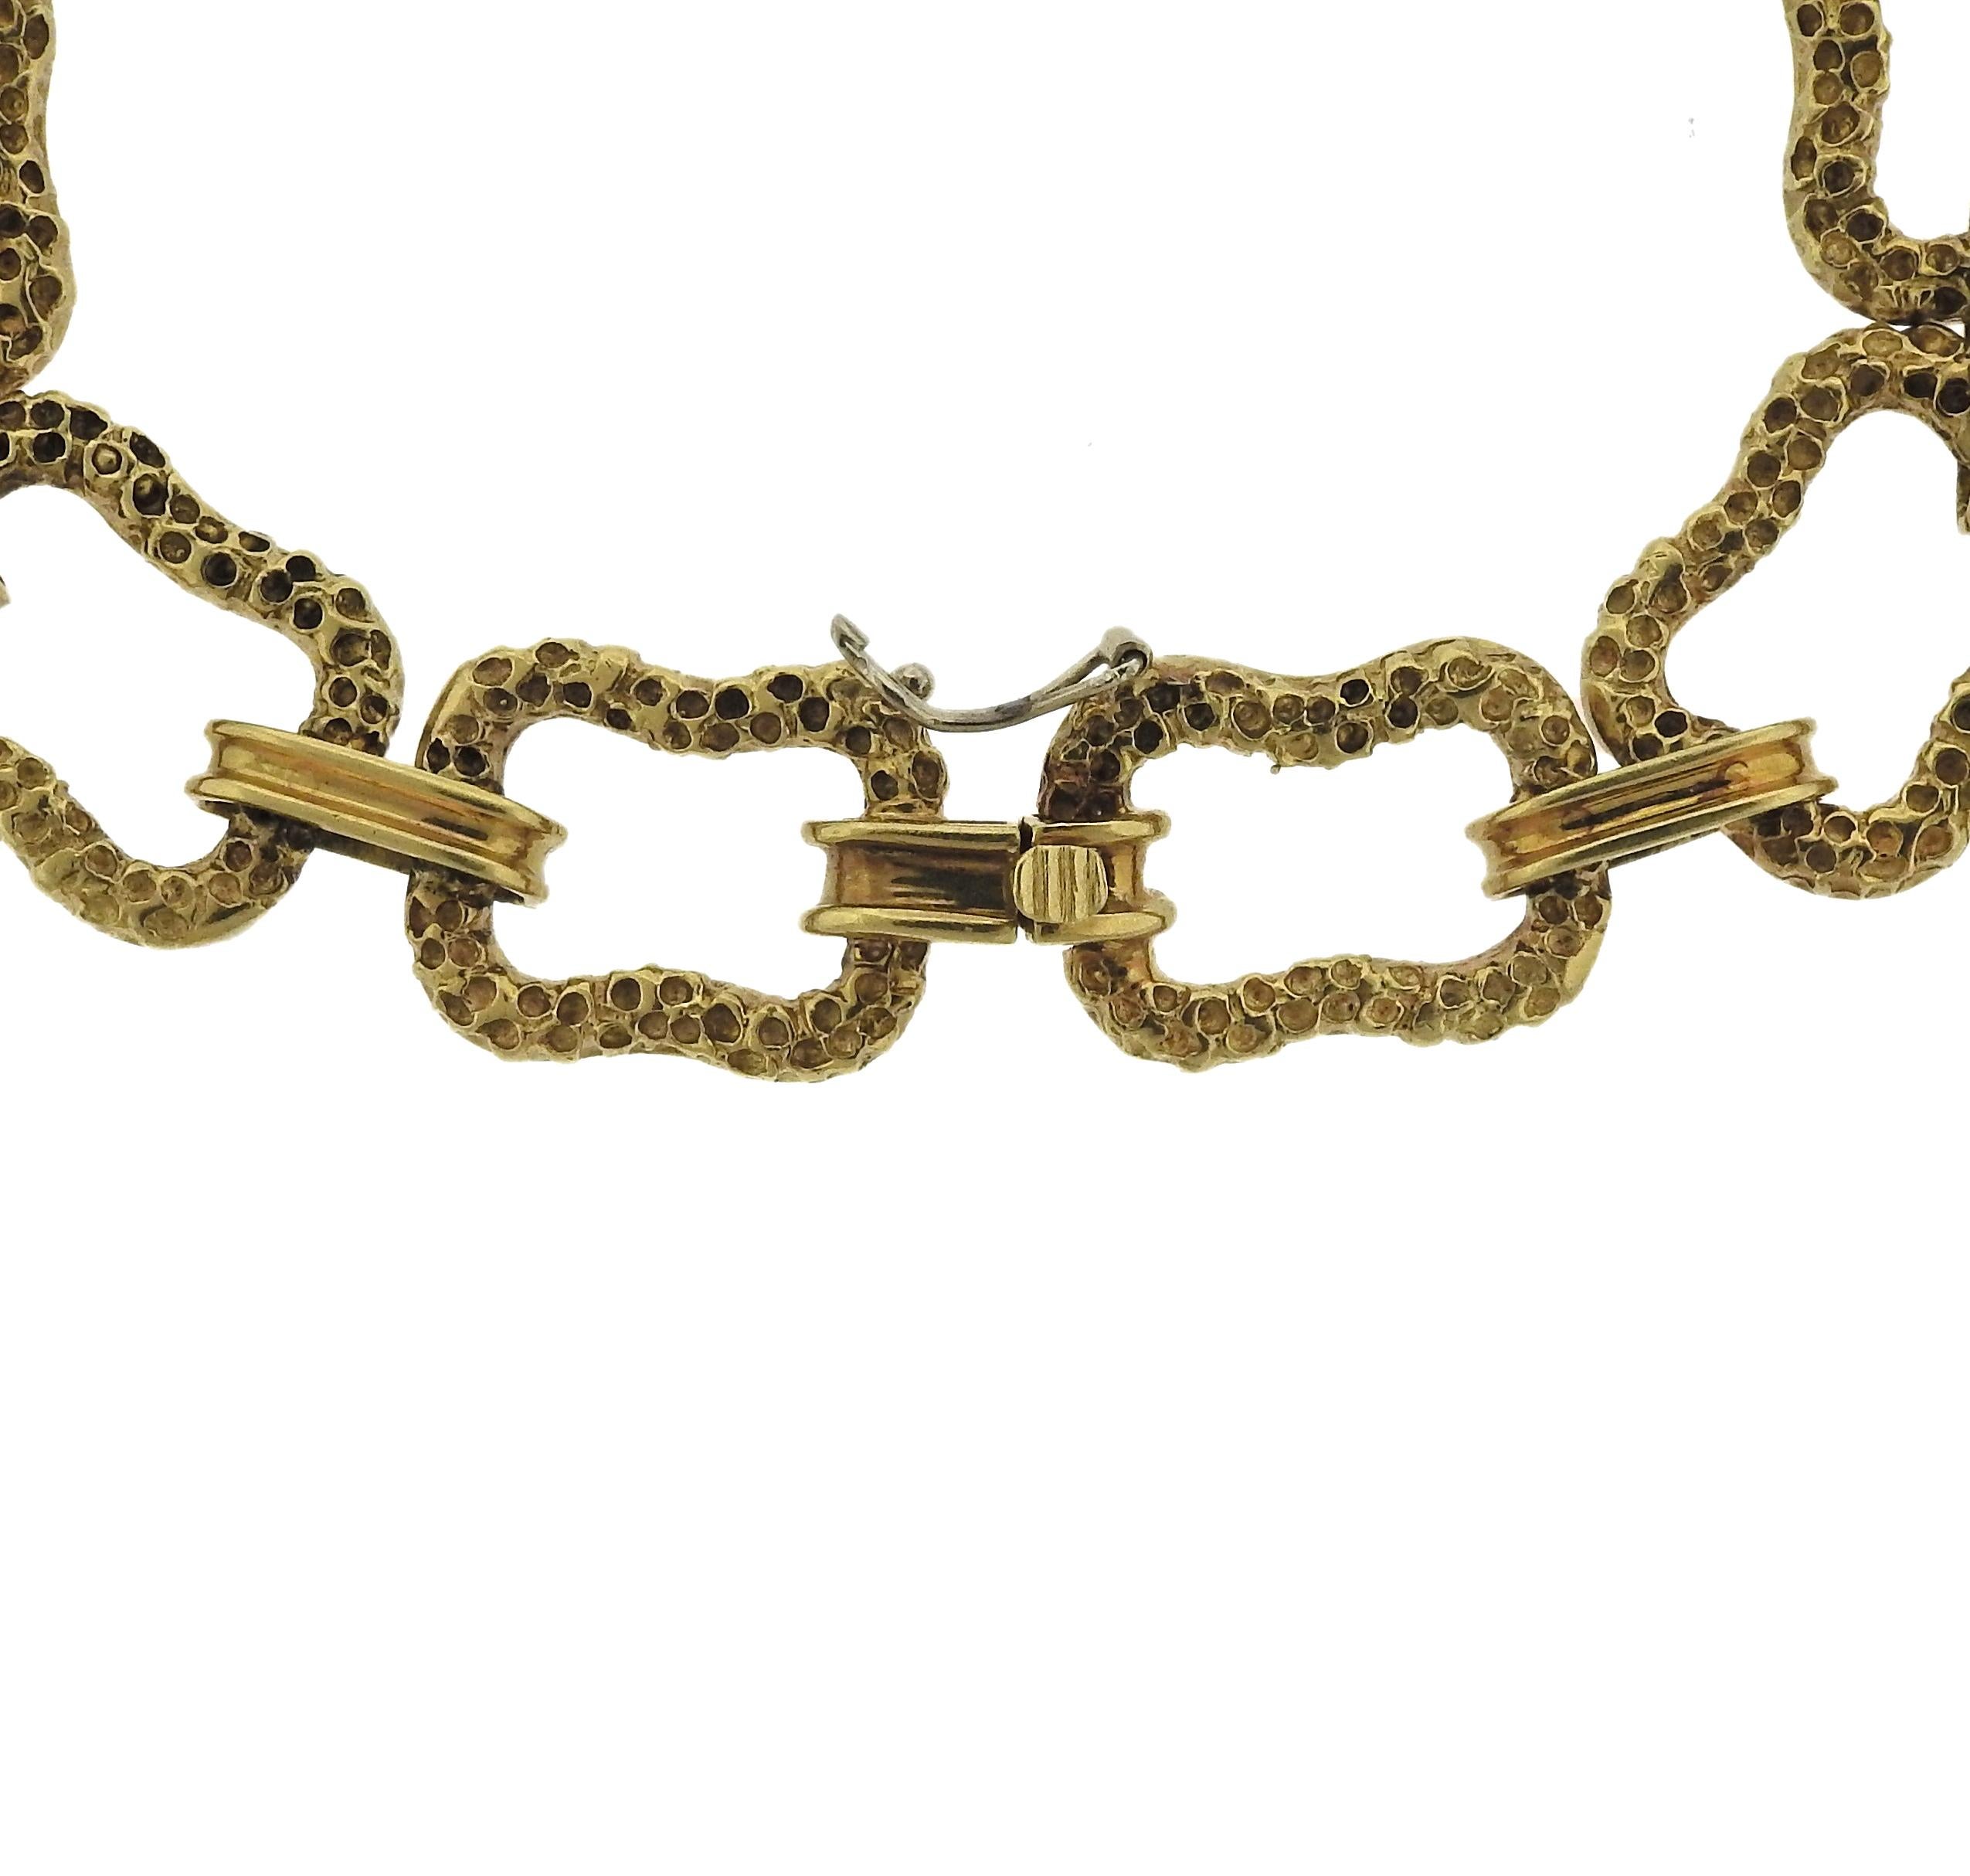 Long 18k gold link necklace, crafted by Paul Flato in circa 1970s. Necklace is 30